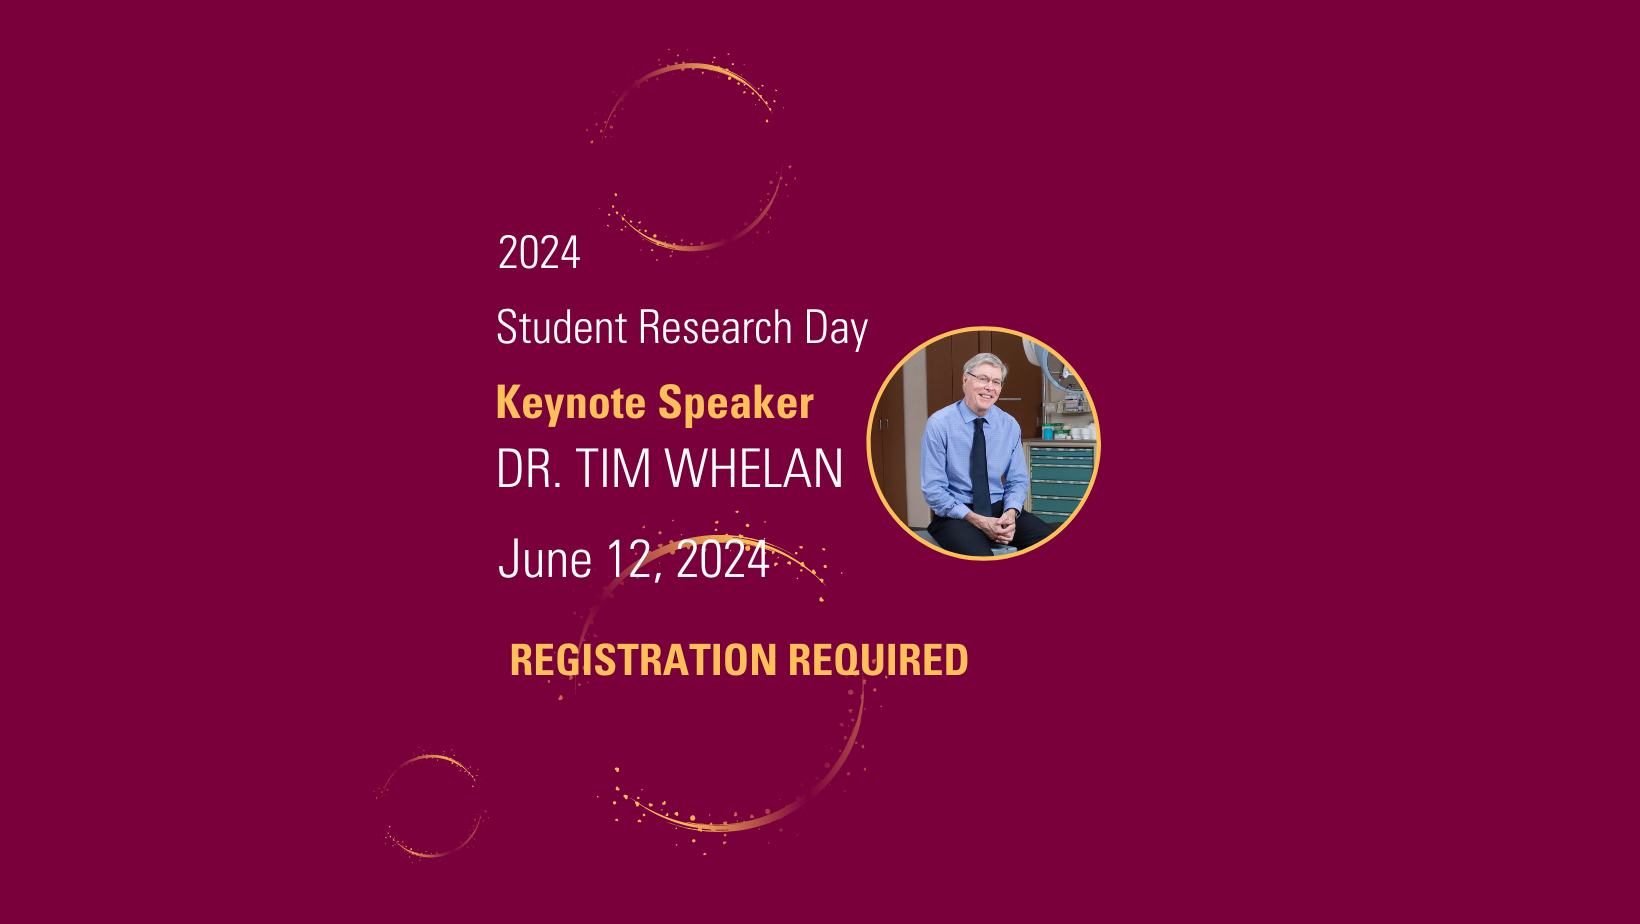 Student Research Day 2024